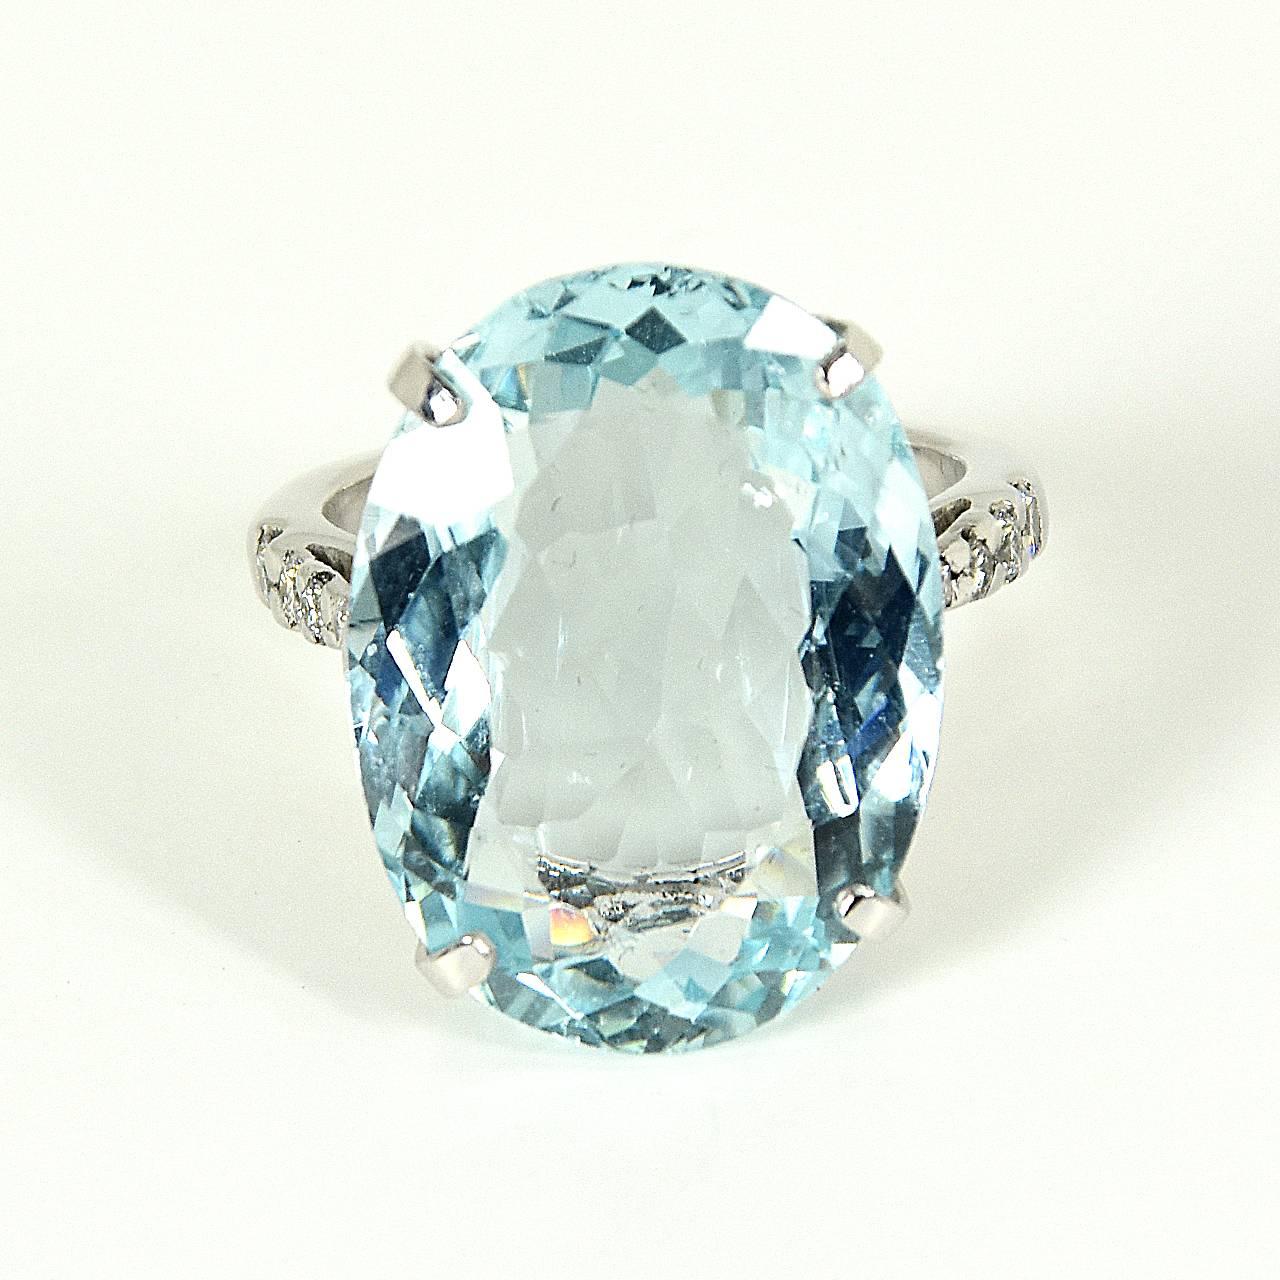 An 18ct White Gold ring, featuring an oval, chequerboar- faceted 14.95ct aquamarine with diamond-set shoulders. 
aquamarine dimensions: 21.8mm x 16.1mm x 7.4mm
approximate total weight: 10.8 grams 
Ring size: American - 7, French/Japanese - 14,